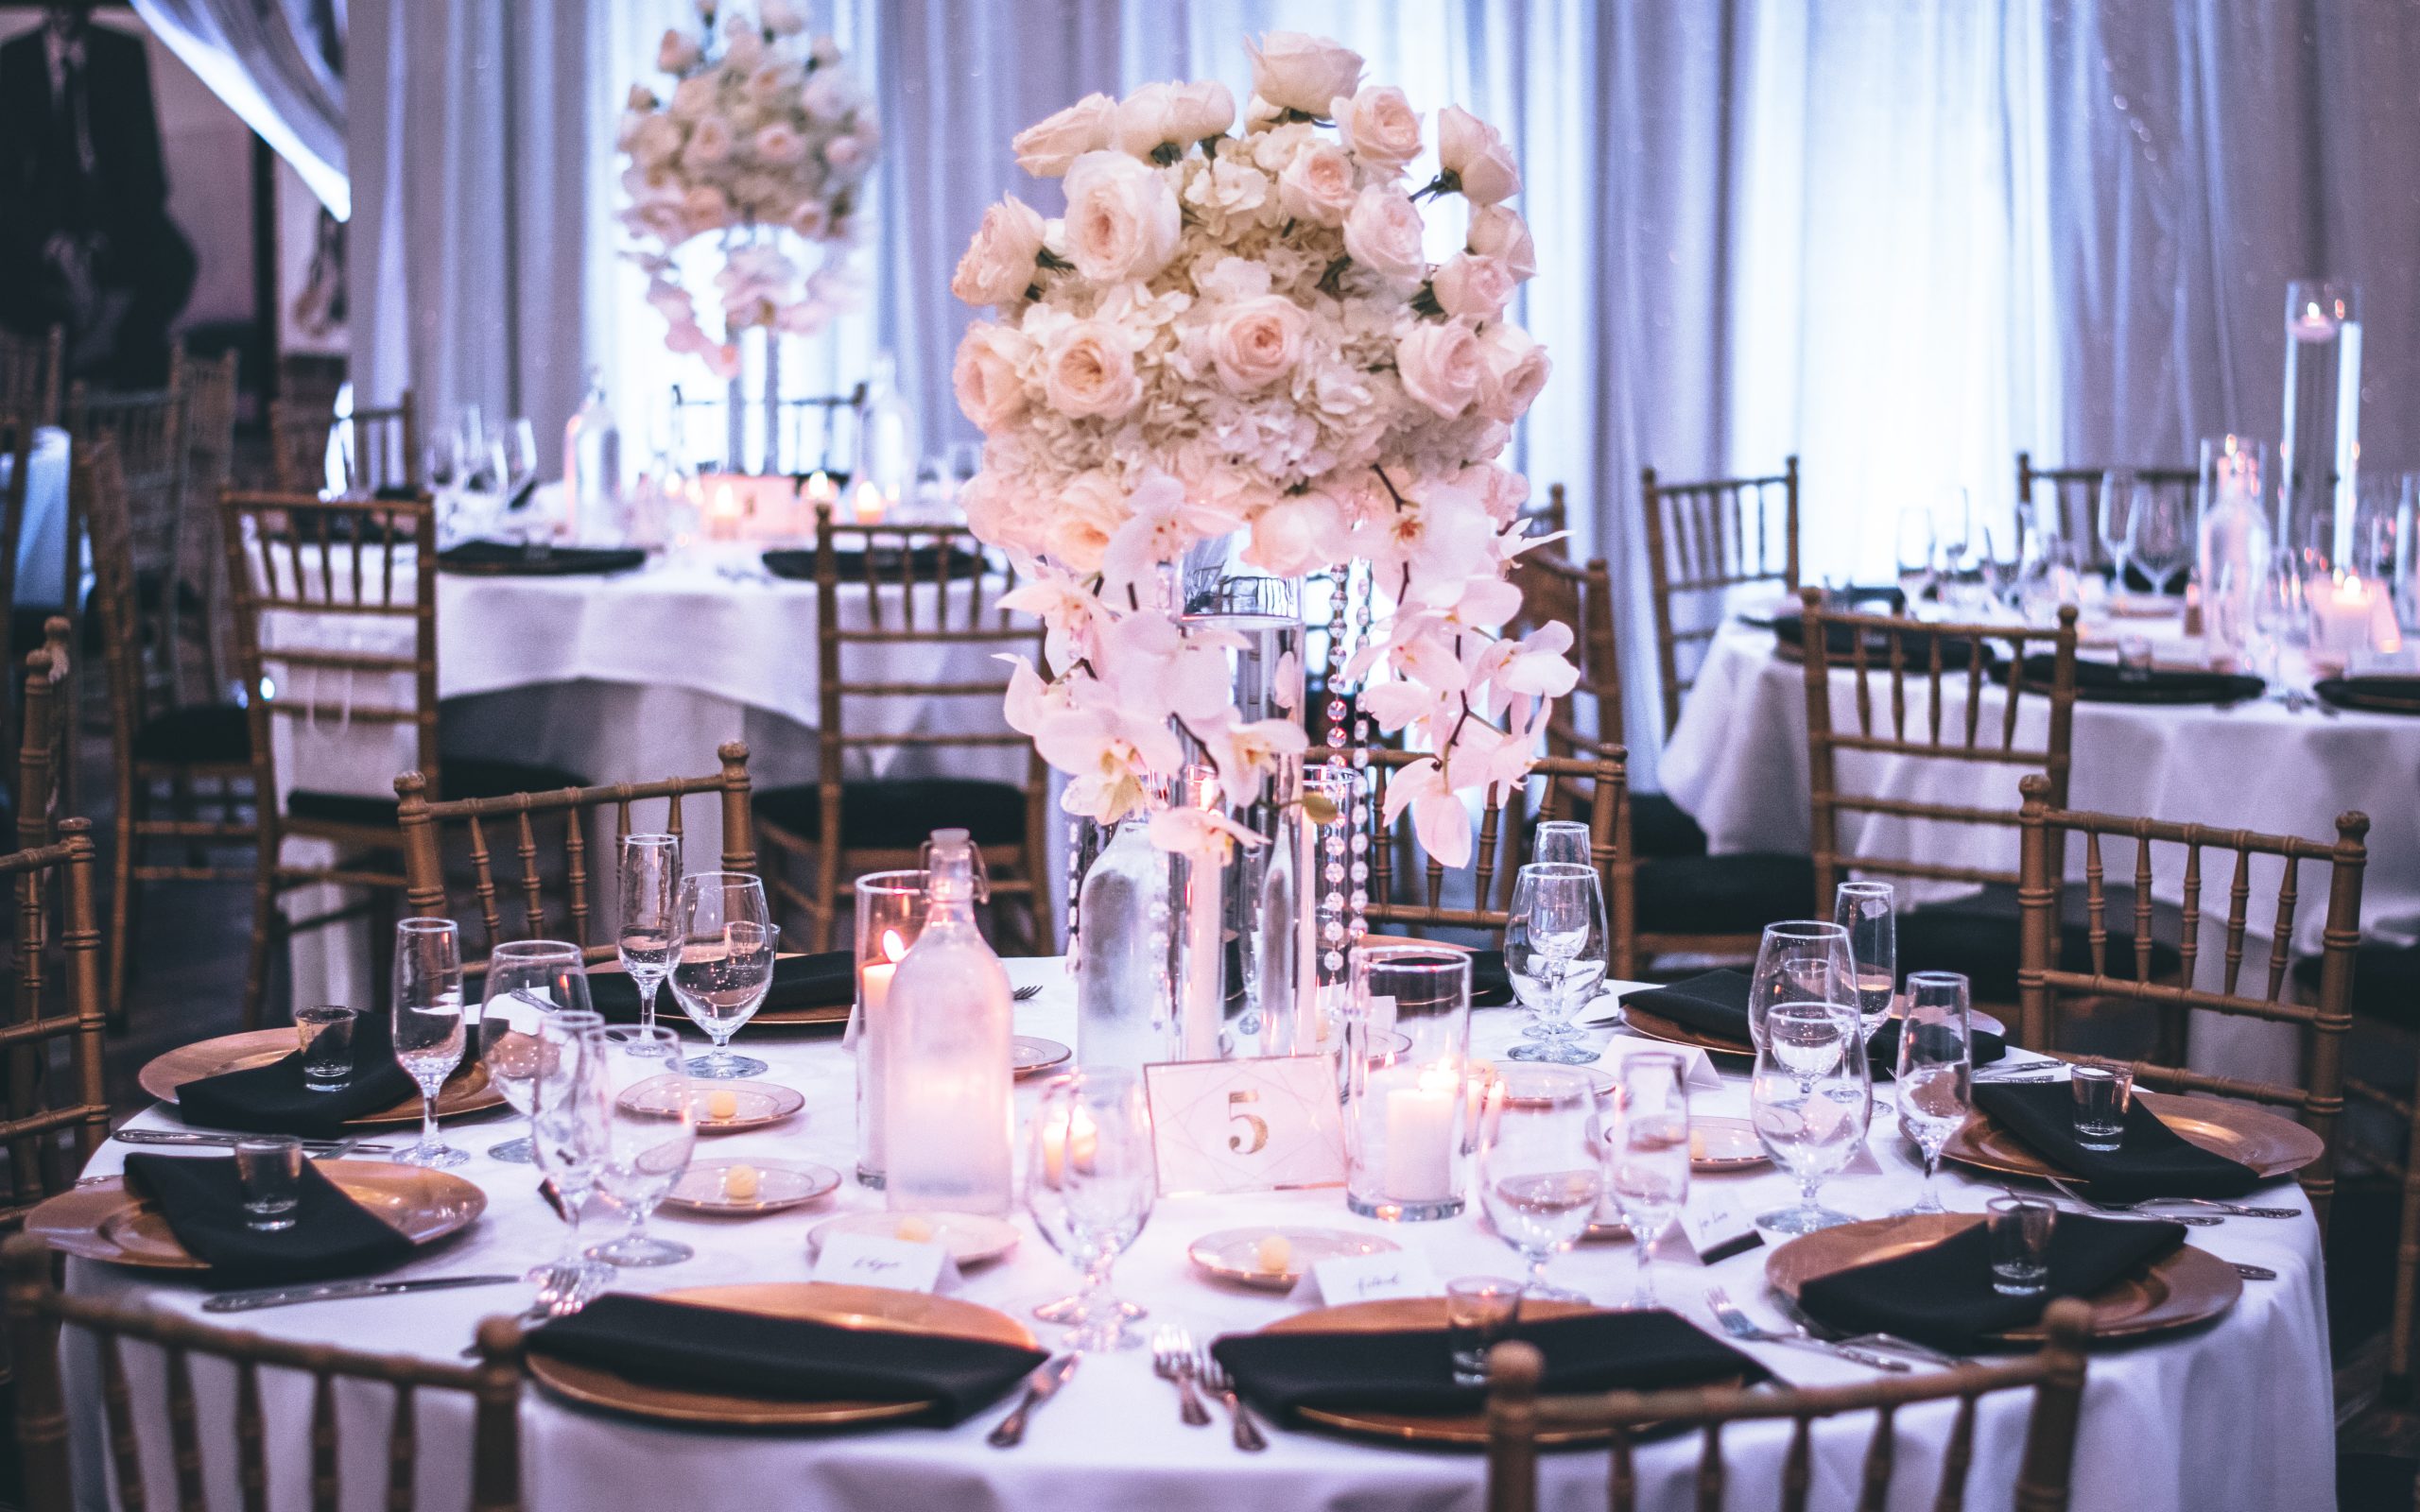 Table decorations make an impact on wedding guests.